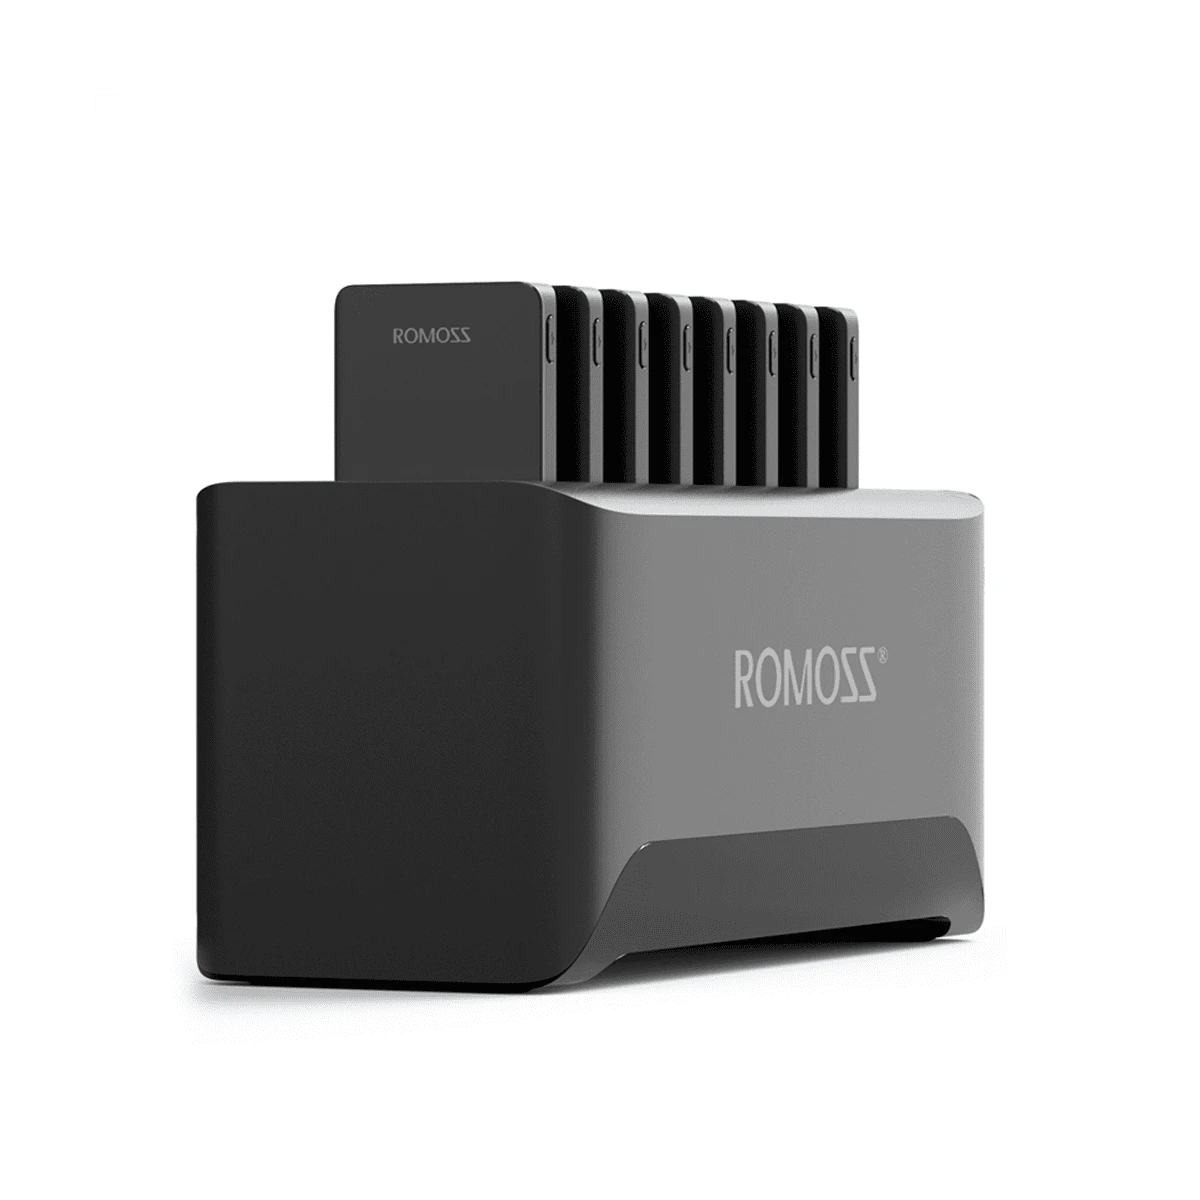 ROMOSS Powerful Charger Station for Family and Business